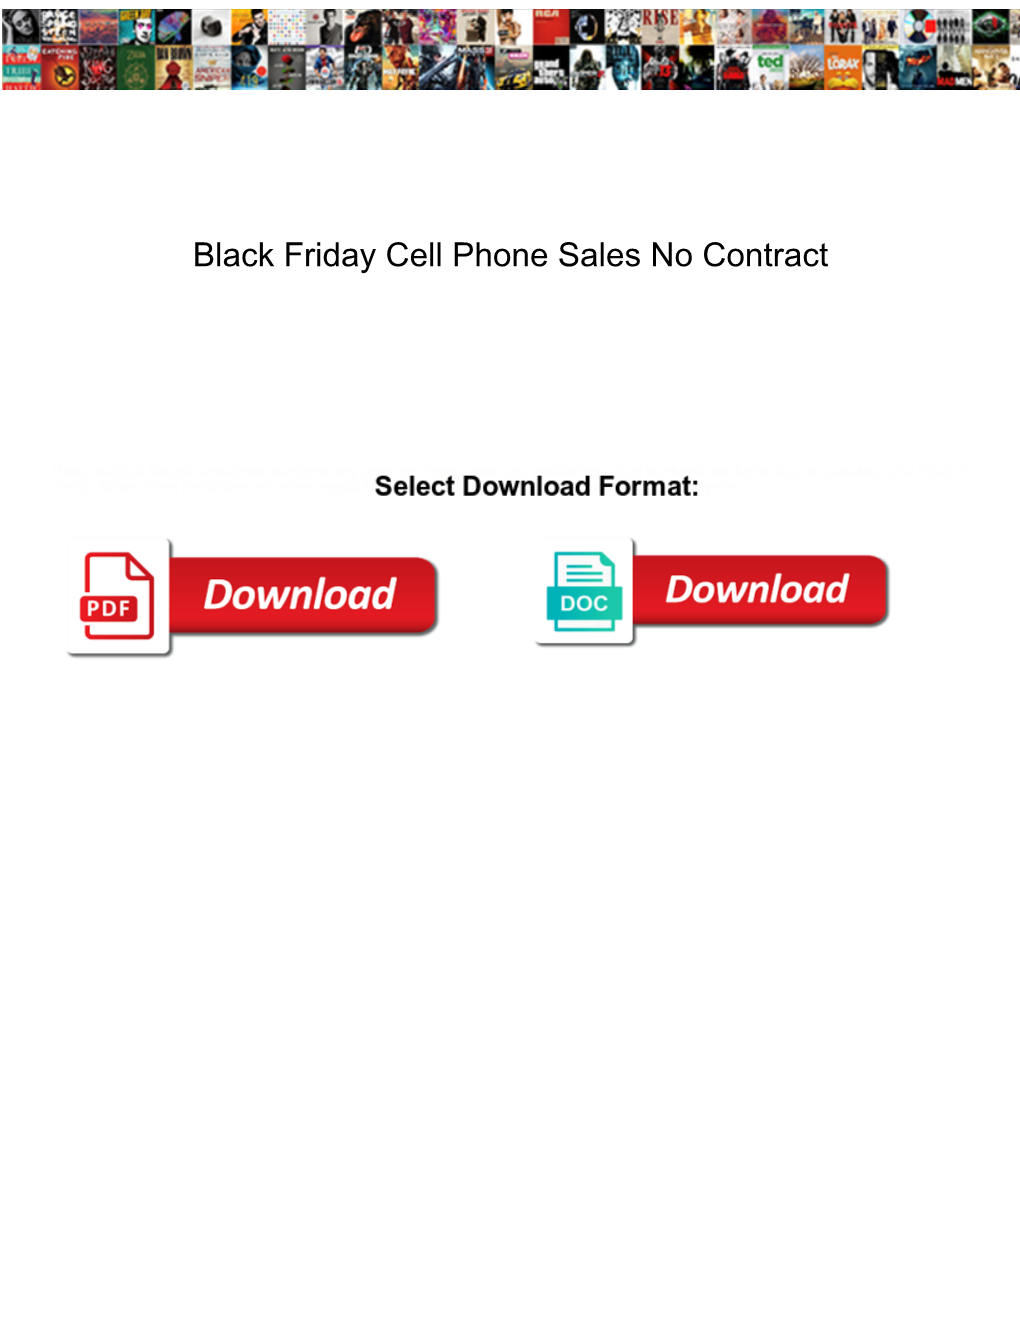 Black Friday Cell Phone Sales No Contract